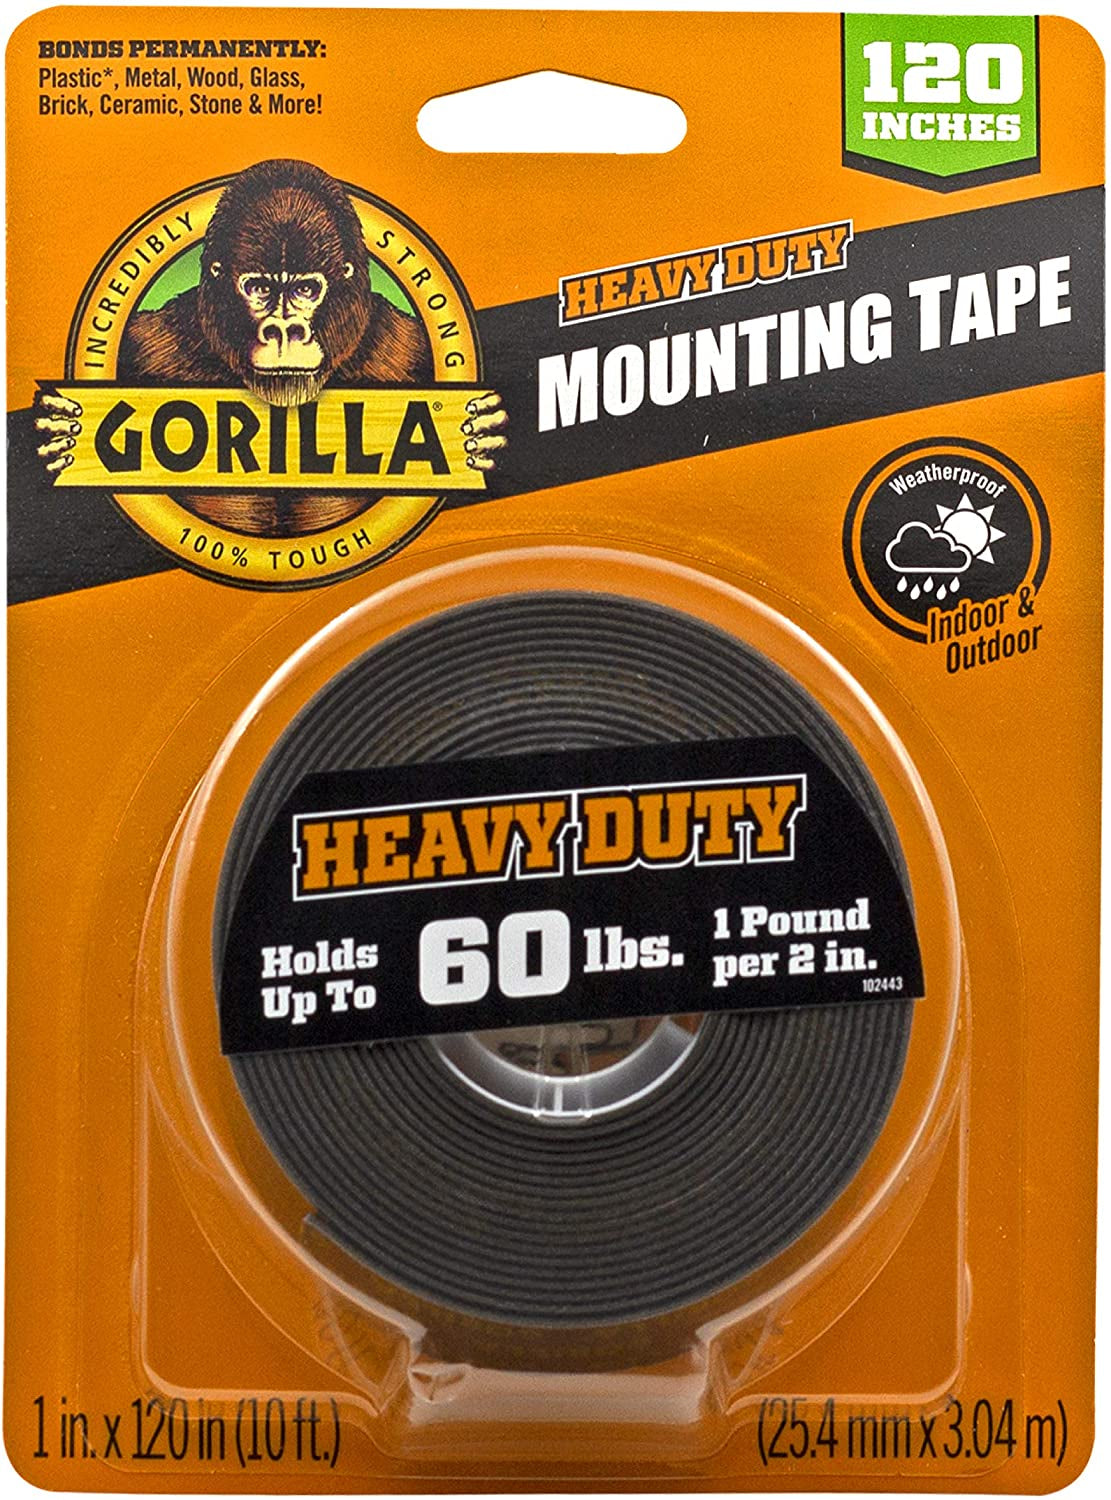 Gorilla, Gorilla Heavy Duty, Extra Long Double Sided Mounting Tape, 1" X 120", Black, (Pack of 1)